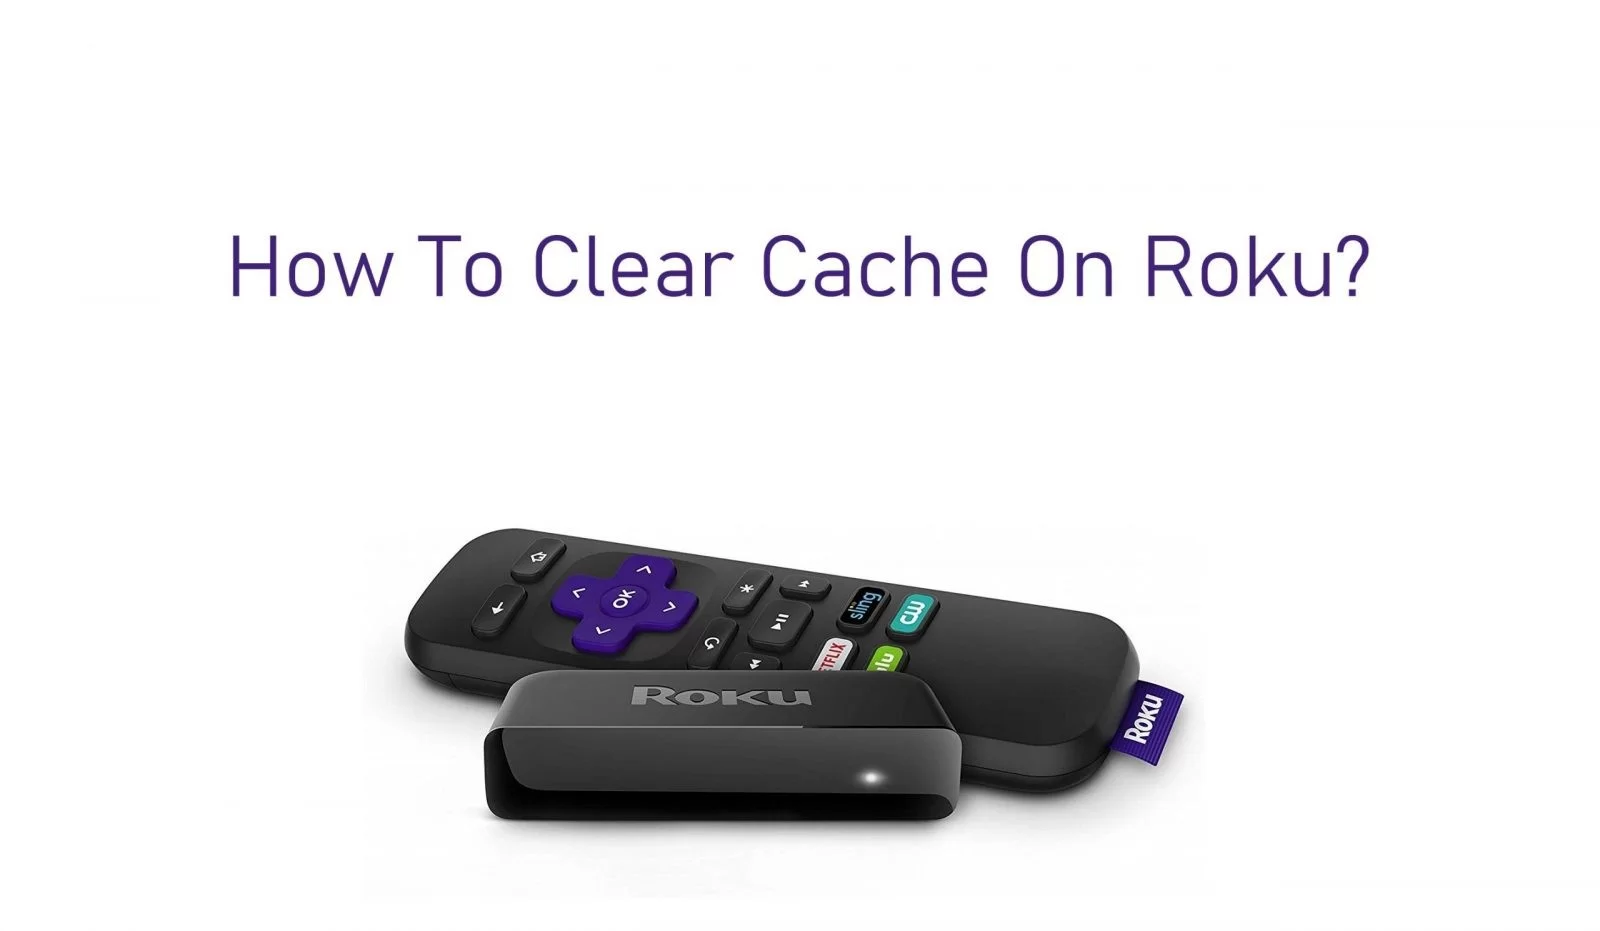 How To Clear Cache On Roku